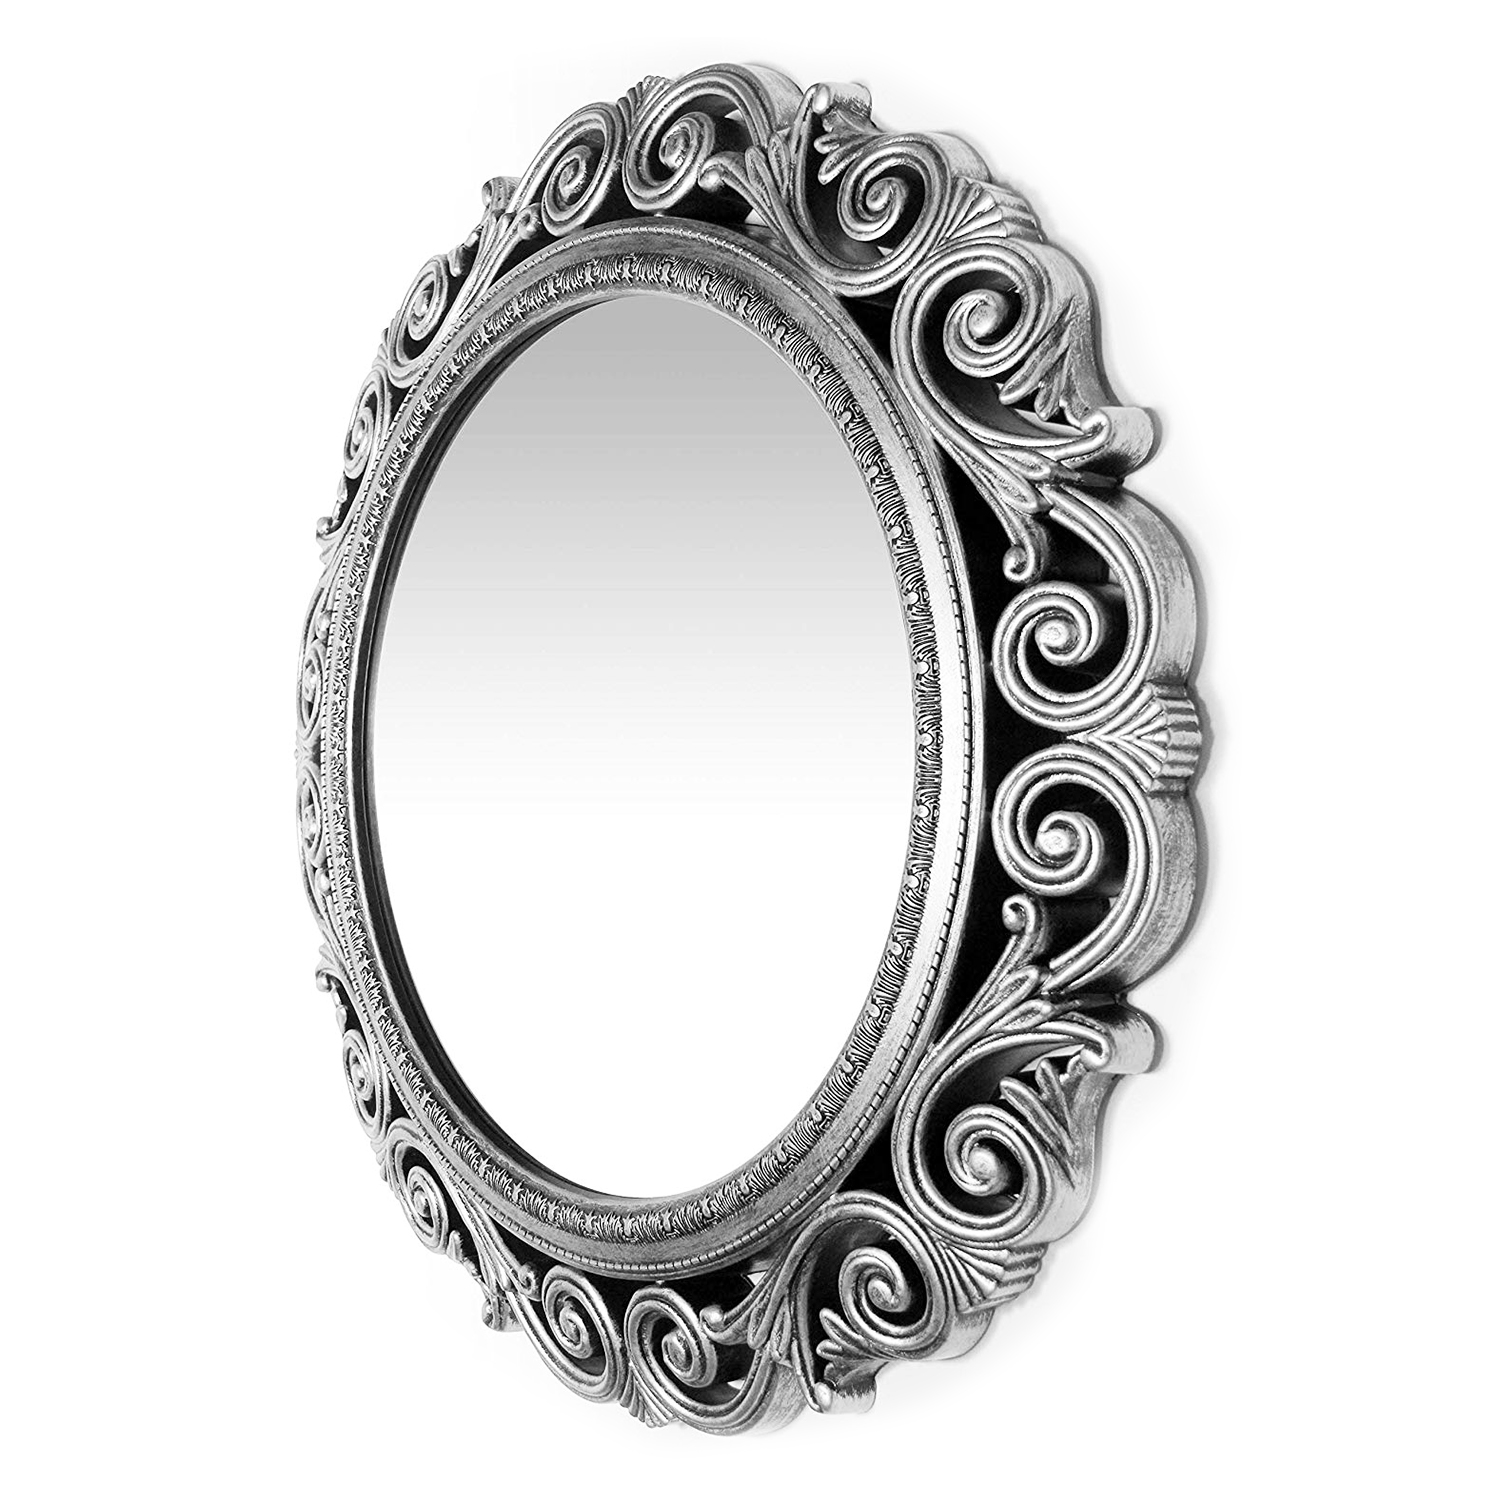 Infinity Instruments Antique Design Large 24-Inch Round Wall Mirror, Silver 